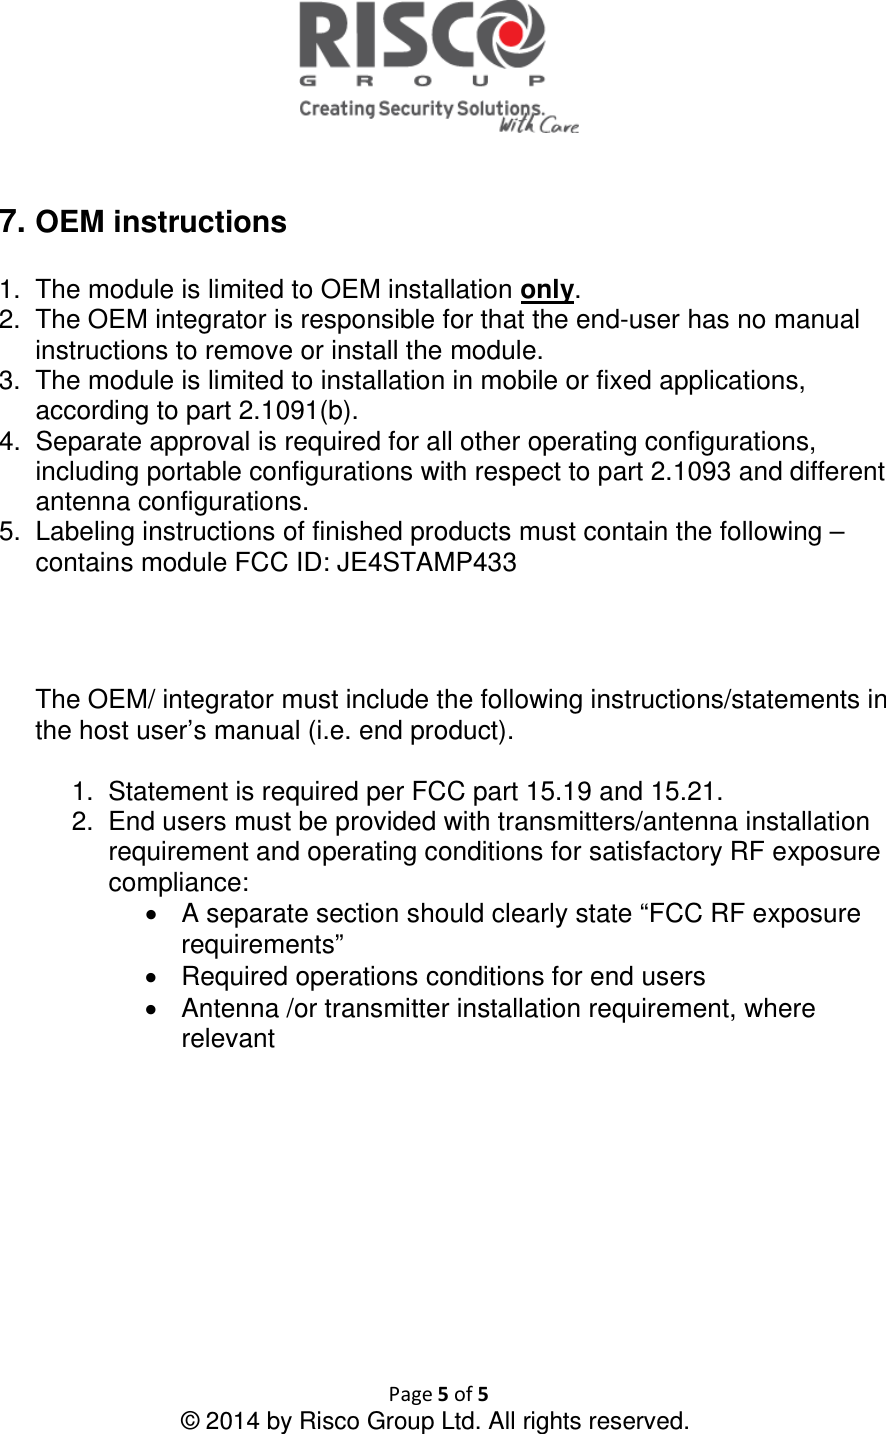  Page 5 of 5 © 2014 by Risco Group Ltd. All rights reserved.    7. OEM instructions  1.  The module is limited to OEM installation only. 2.  The OEM integrator is responsible for that the end-user has no manual instructions to remove or install the module. 3.  The module is limited to installation in mobile or fixed applications, according to part 2.1091(b). 4.  Separate approval is required for all other operating configurations, including portable configurations with respect to part 2.1093 and different antenna configurations. 5.  Labeling instructions of finished products must contain the following – contains module FCC ID: JE4STAMP433      The OEM/ integrator must include the following instructions/statements in the host user’s manual (i.e. end product).  1.  Statement is required per FCC part 15.19 and 15.21. 2.  End users must be provided with transmitters/antenna installation requirement and operating conditions for satisfactory RF exposure compliance: •  A separate section should clearly state “FCC RF exposure requirements”  •  Required operations conditions for end users •  Antenna /or transmitter installation requirement, where relevant     